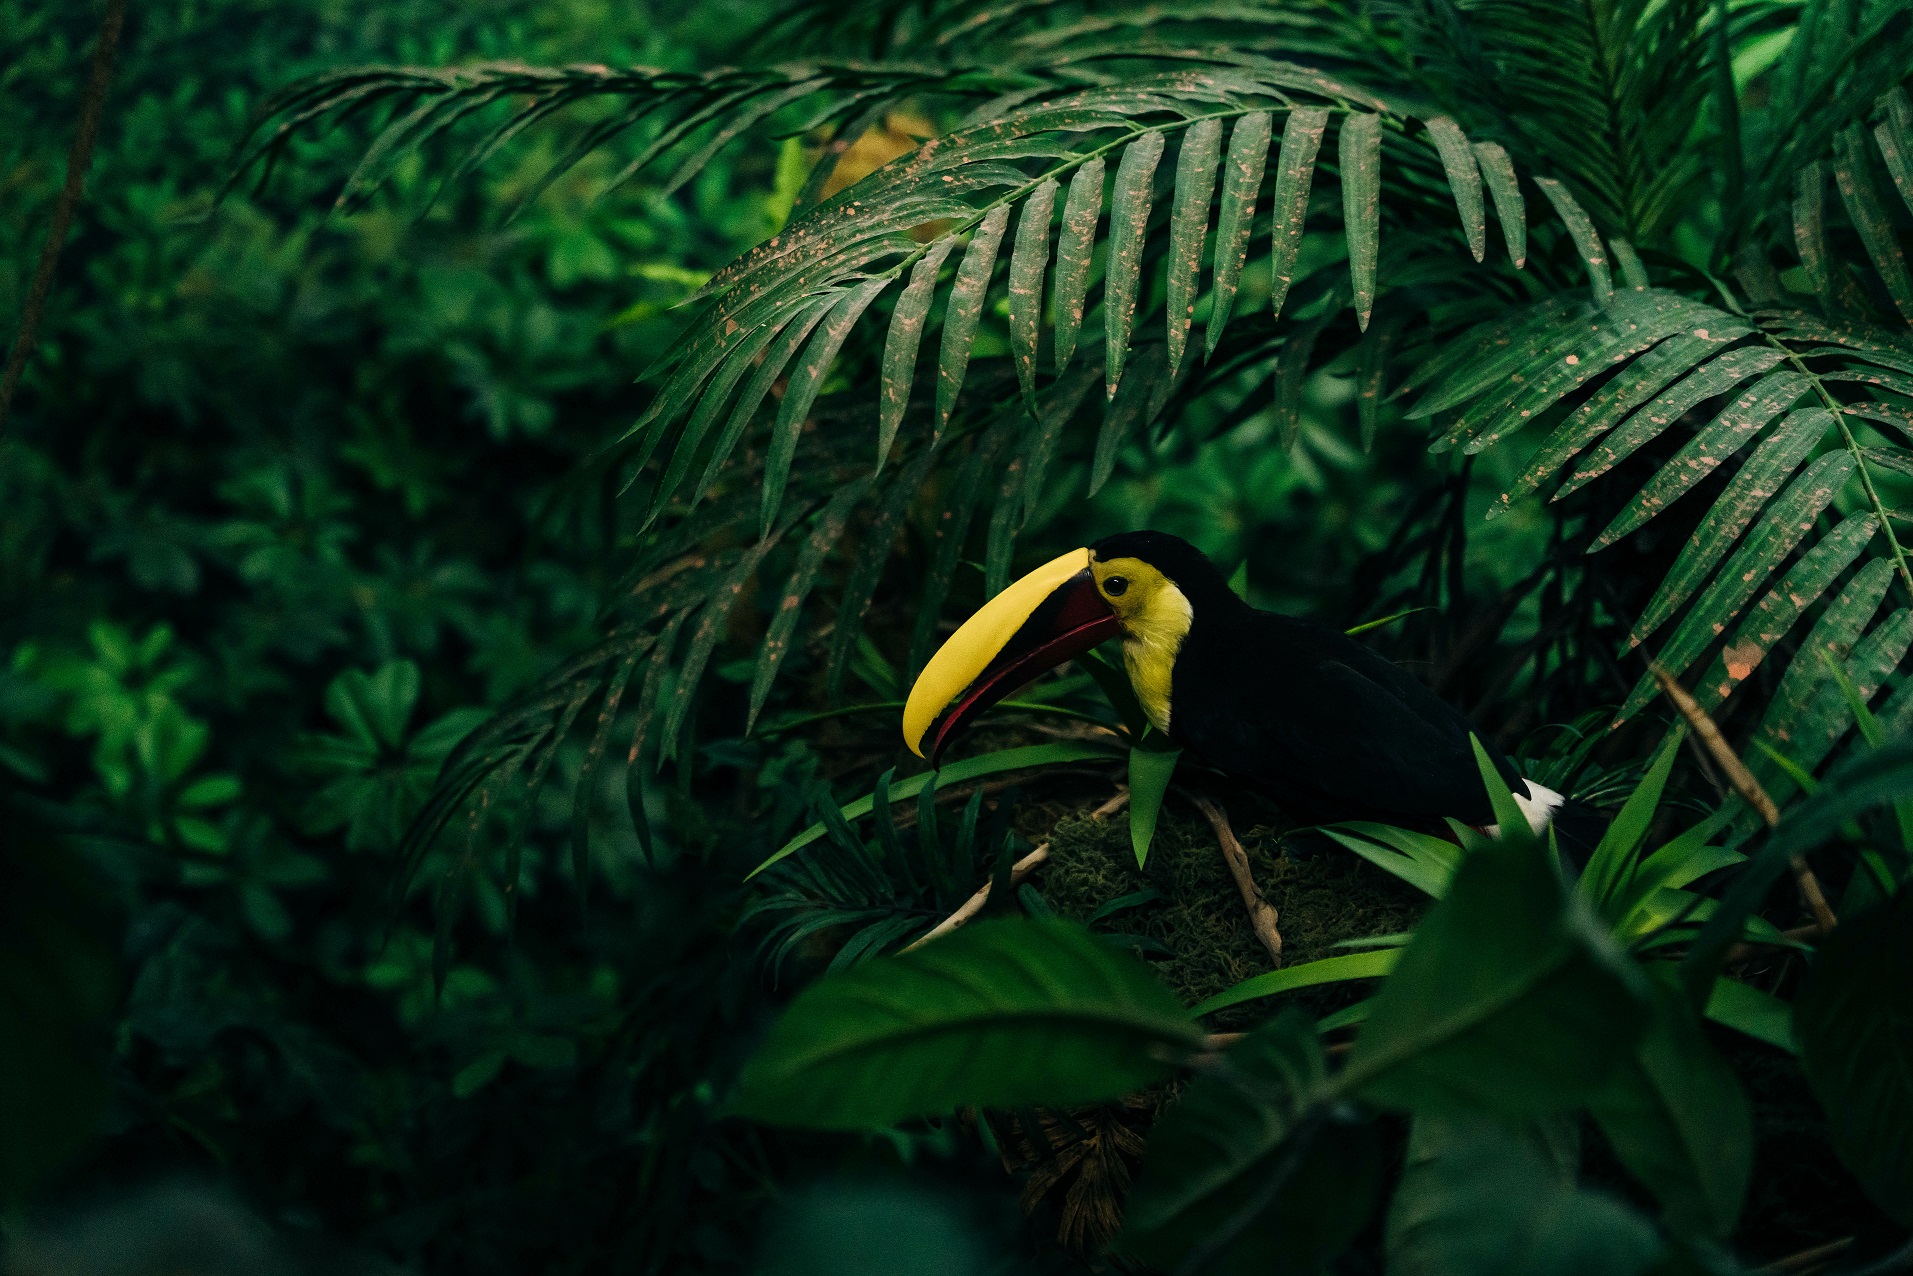 Toucan tropical bird sitting on a tree branch in natural wildlife environment in rainforest jungle. High quality photo